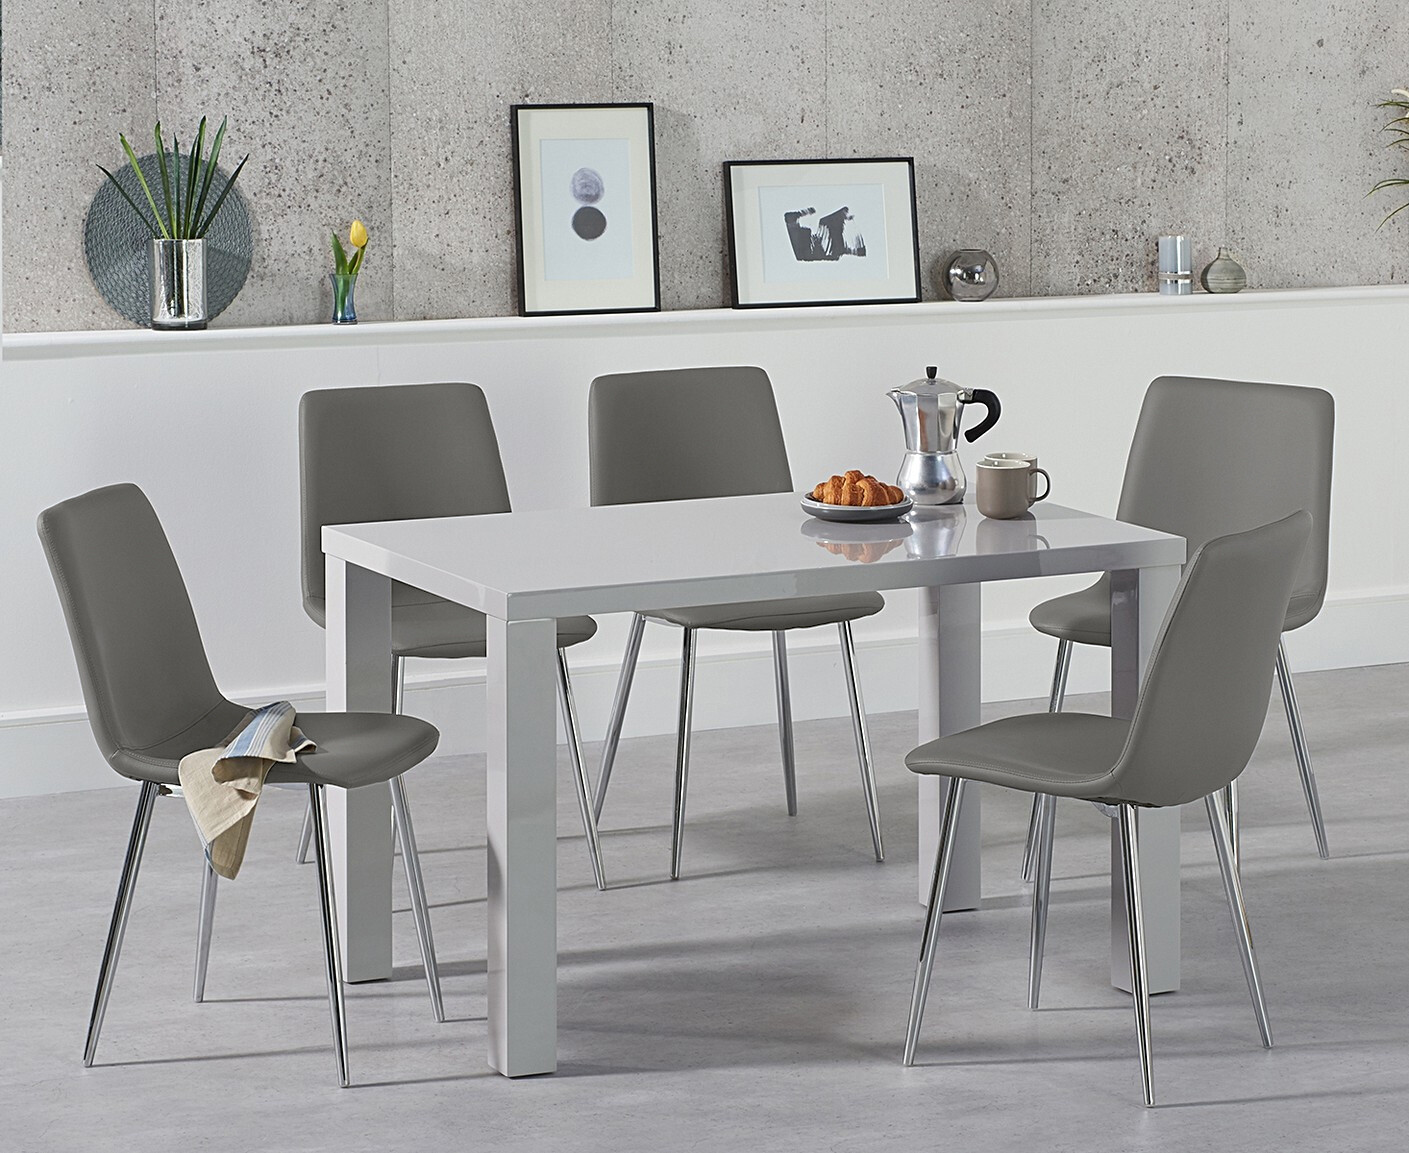 Photo 1 of Seattle 120cm light grey high gloss dining table with 4 grey astrid chairs